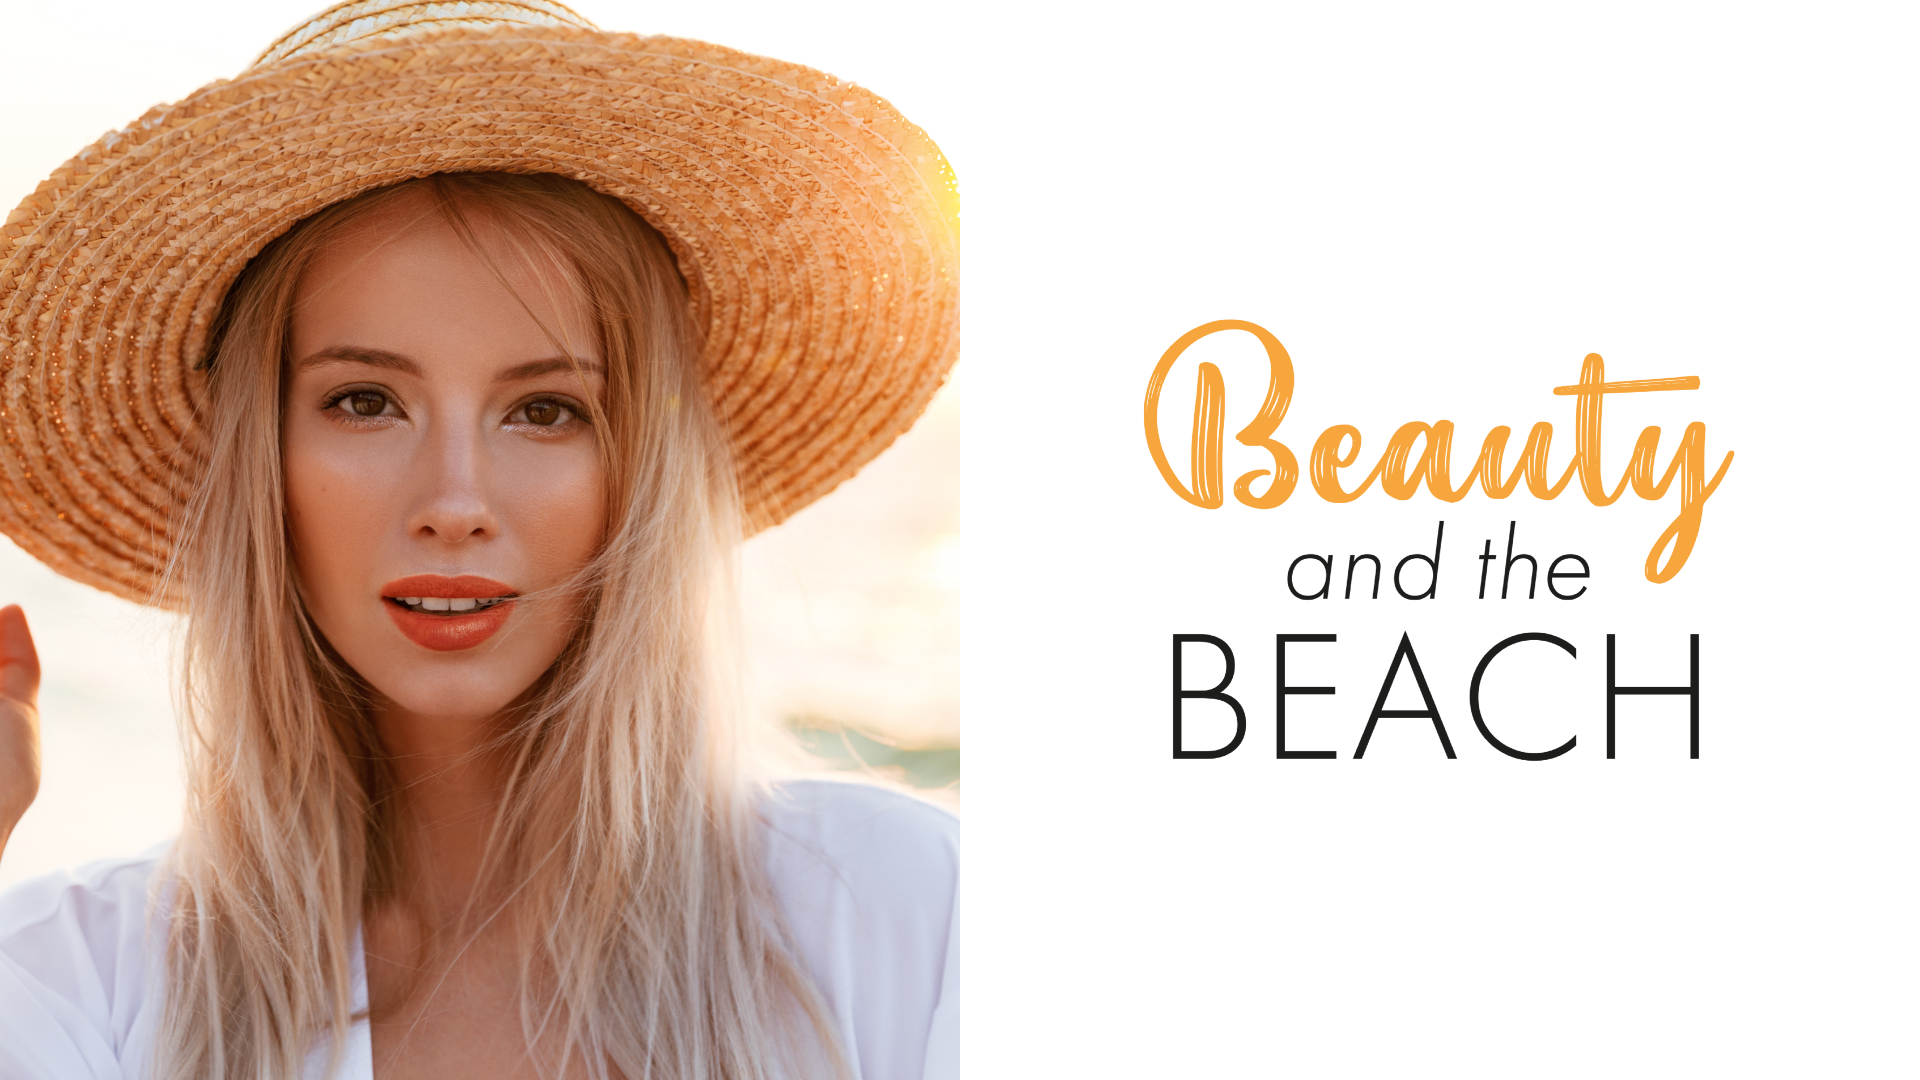 BEAUTY and the BEACH